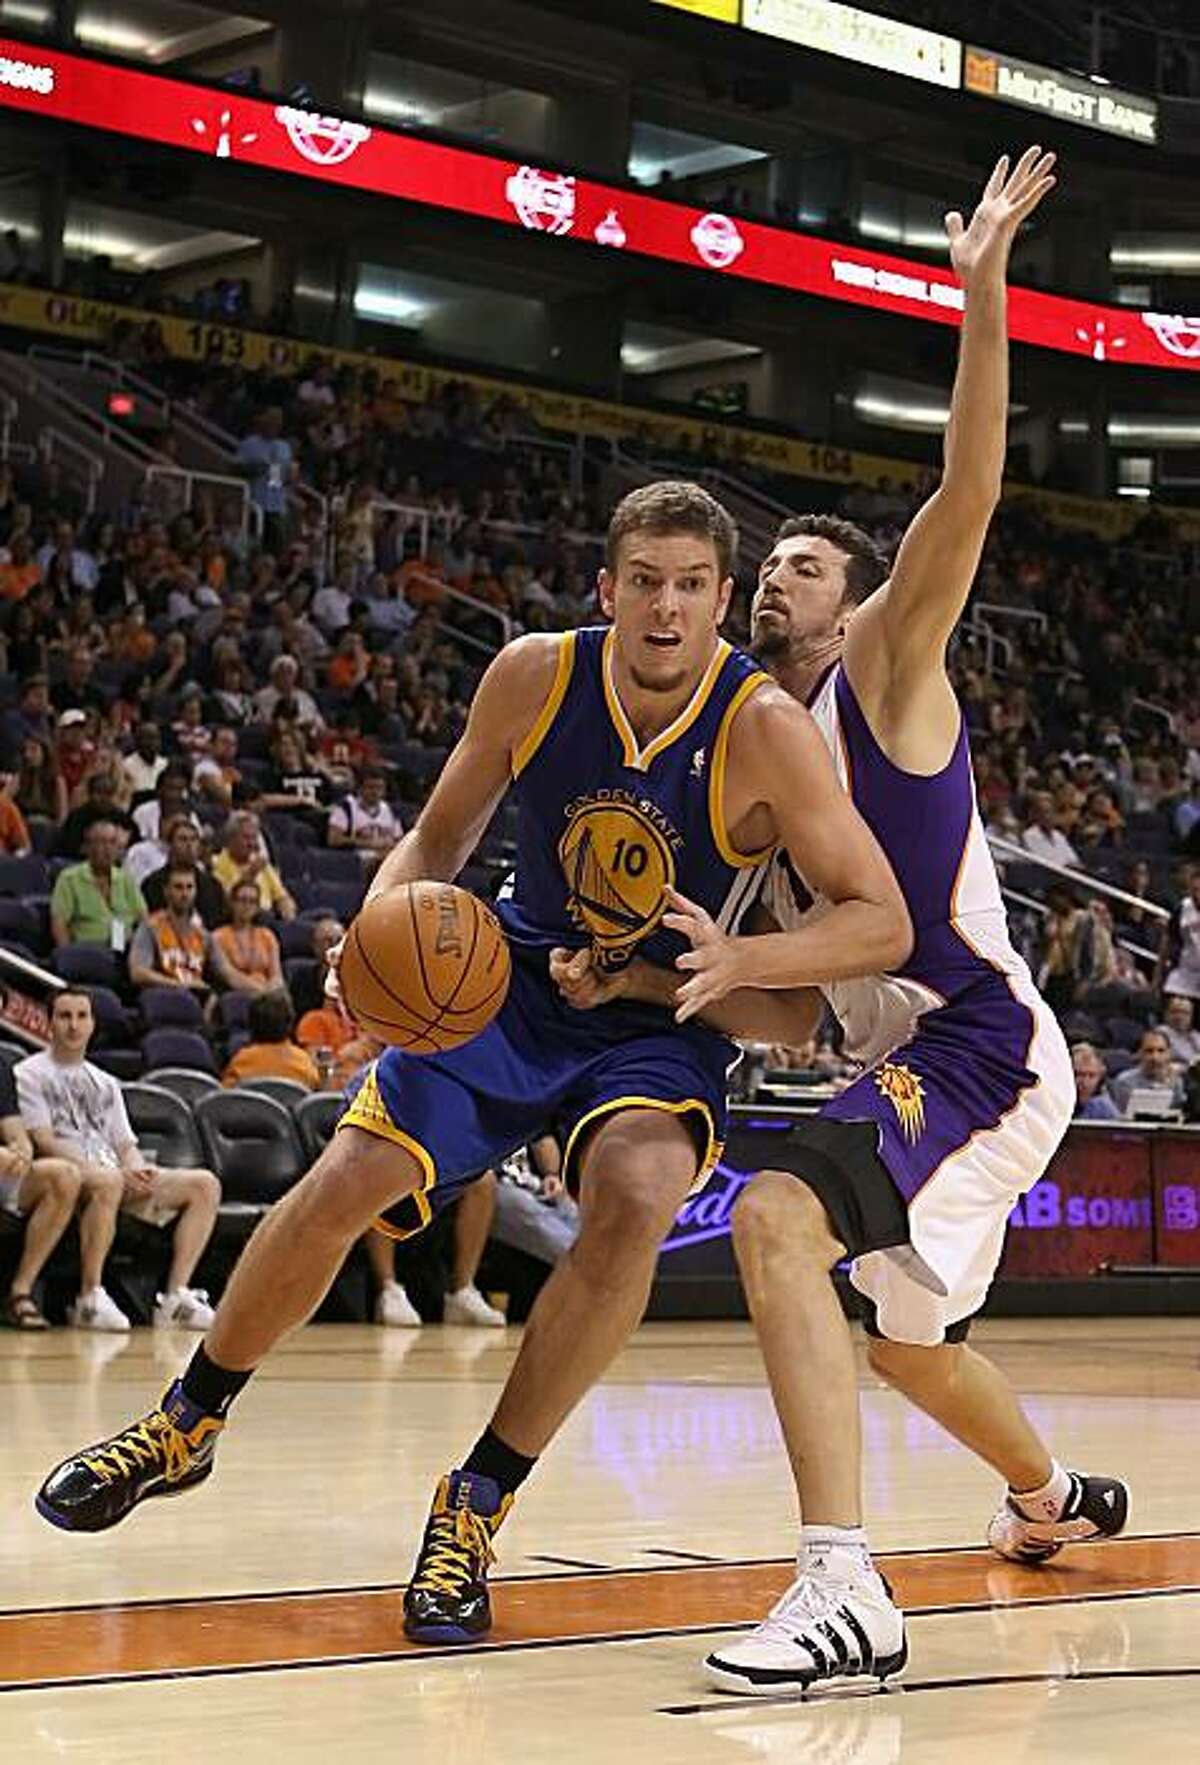 PHOENIX - OCTOBER 19: David Lee #10 of the Golden State Warriors handles the ball under pressure from Hedo Turkoglu #19 of the Phoenix Suns during the preseason NBA game at US Airways Center on October 19, 2010 in Phoenix, Arizona. NOTE TO USER: User expressly acknowledges and agrees that, by downloading and or using this photograph, User is consenting to the terms and conditions of the Getty Images License Agreement.